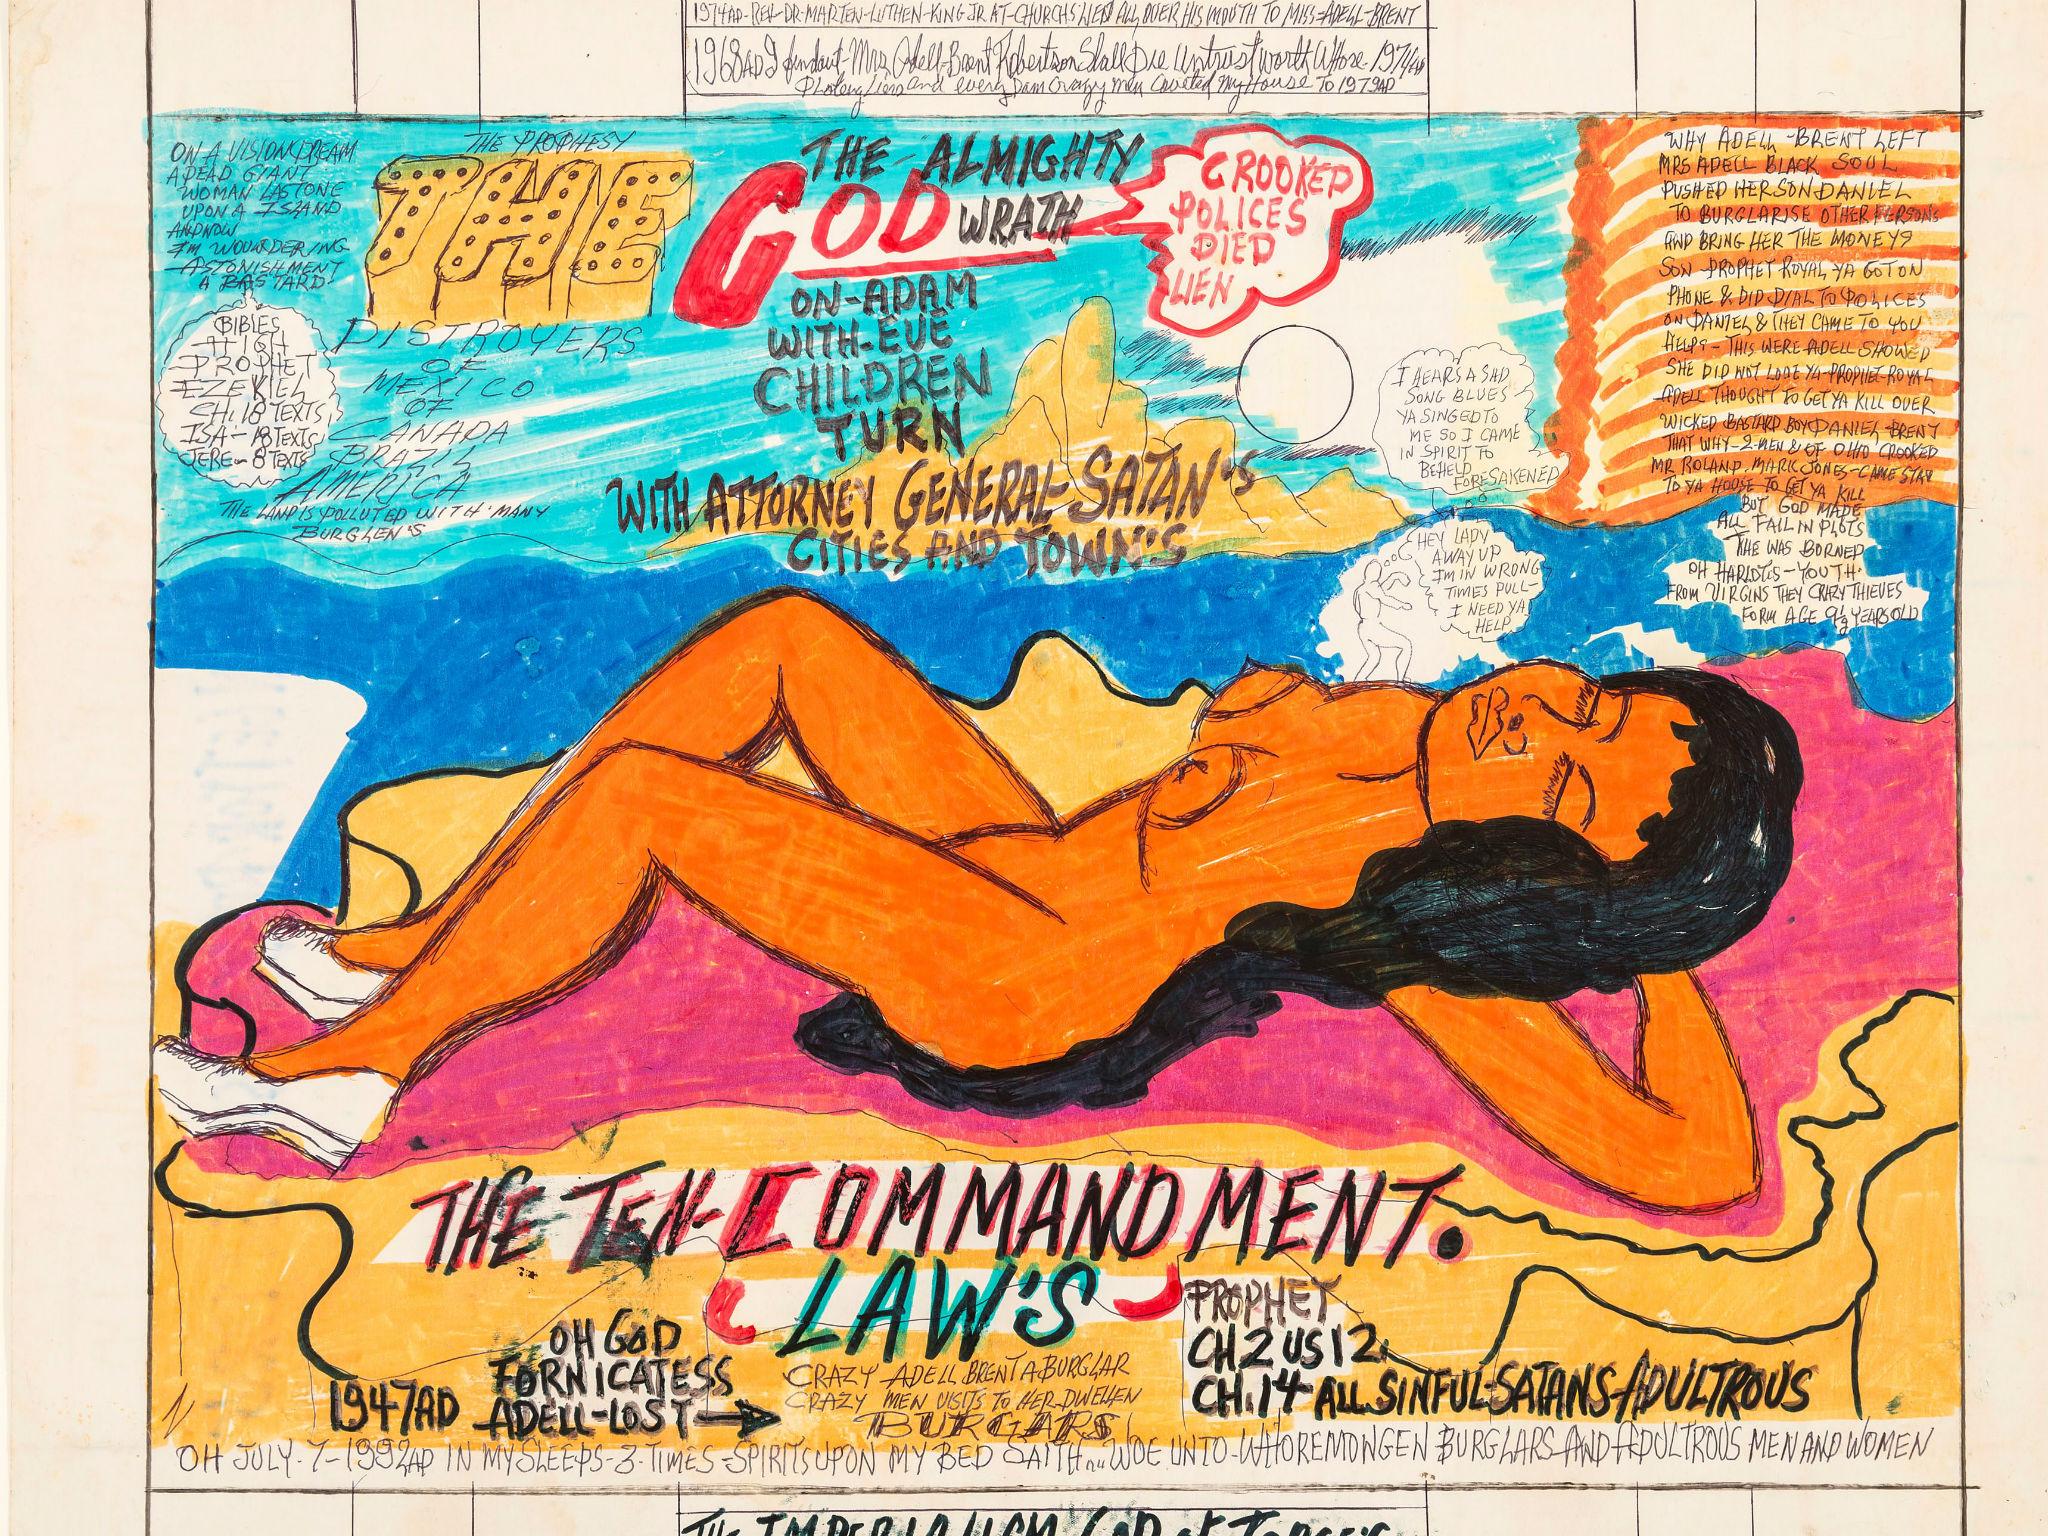 The Museum of Sex The show of outsider artists and sex is set to shock The Independent The Independent pic